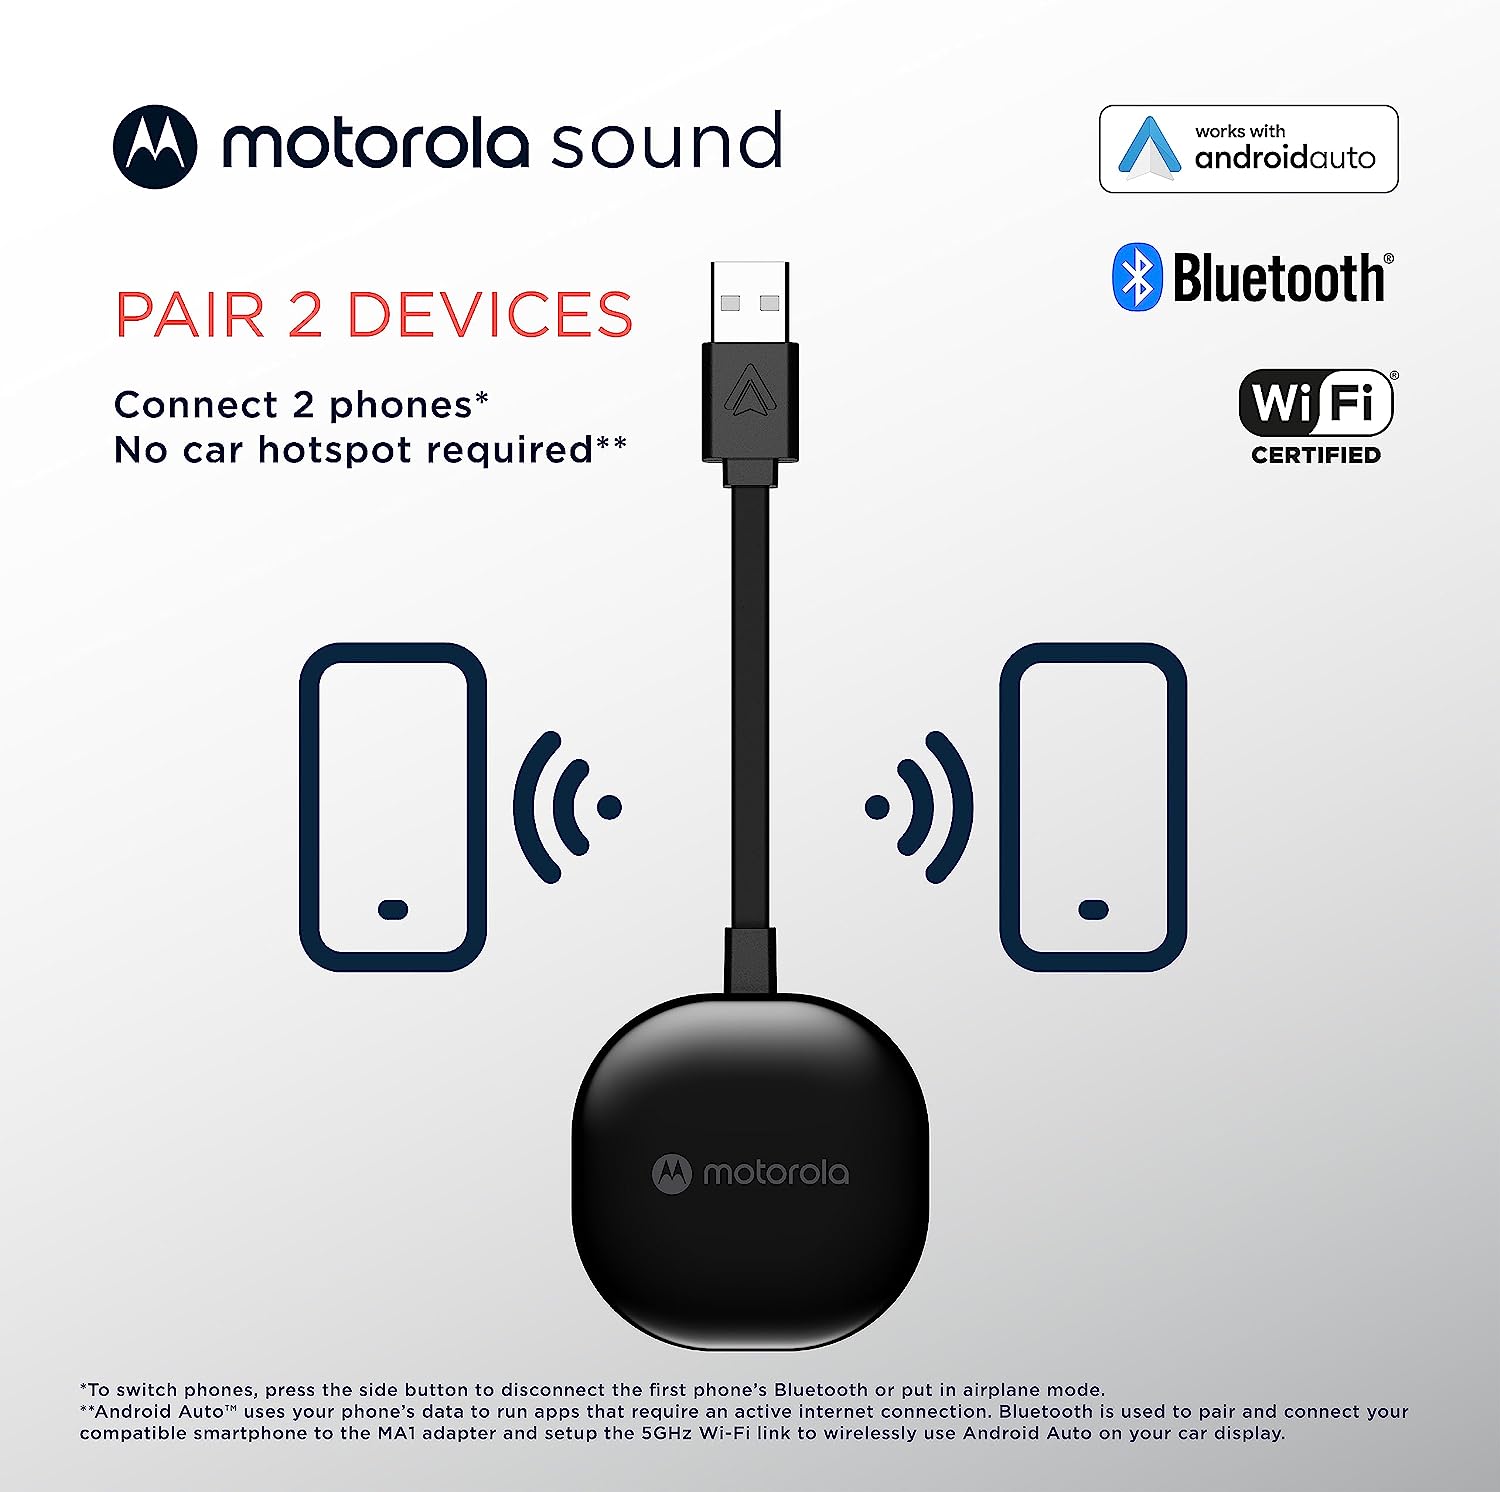 Motorola MA1 Wireless Android Auto Car Adapter - Instant Smartphone to Car  Screen Connection 